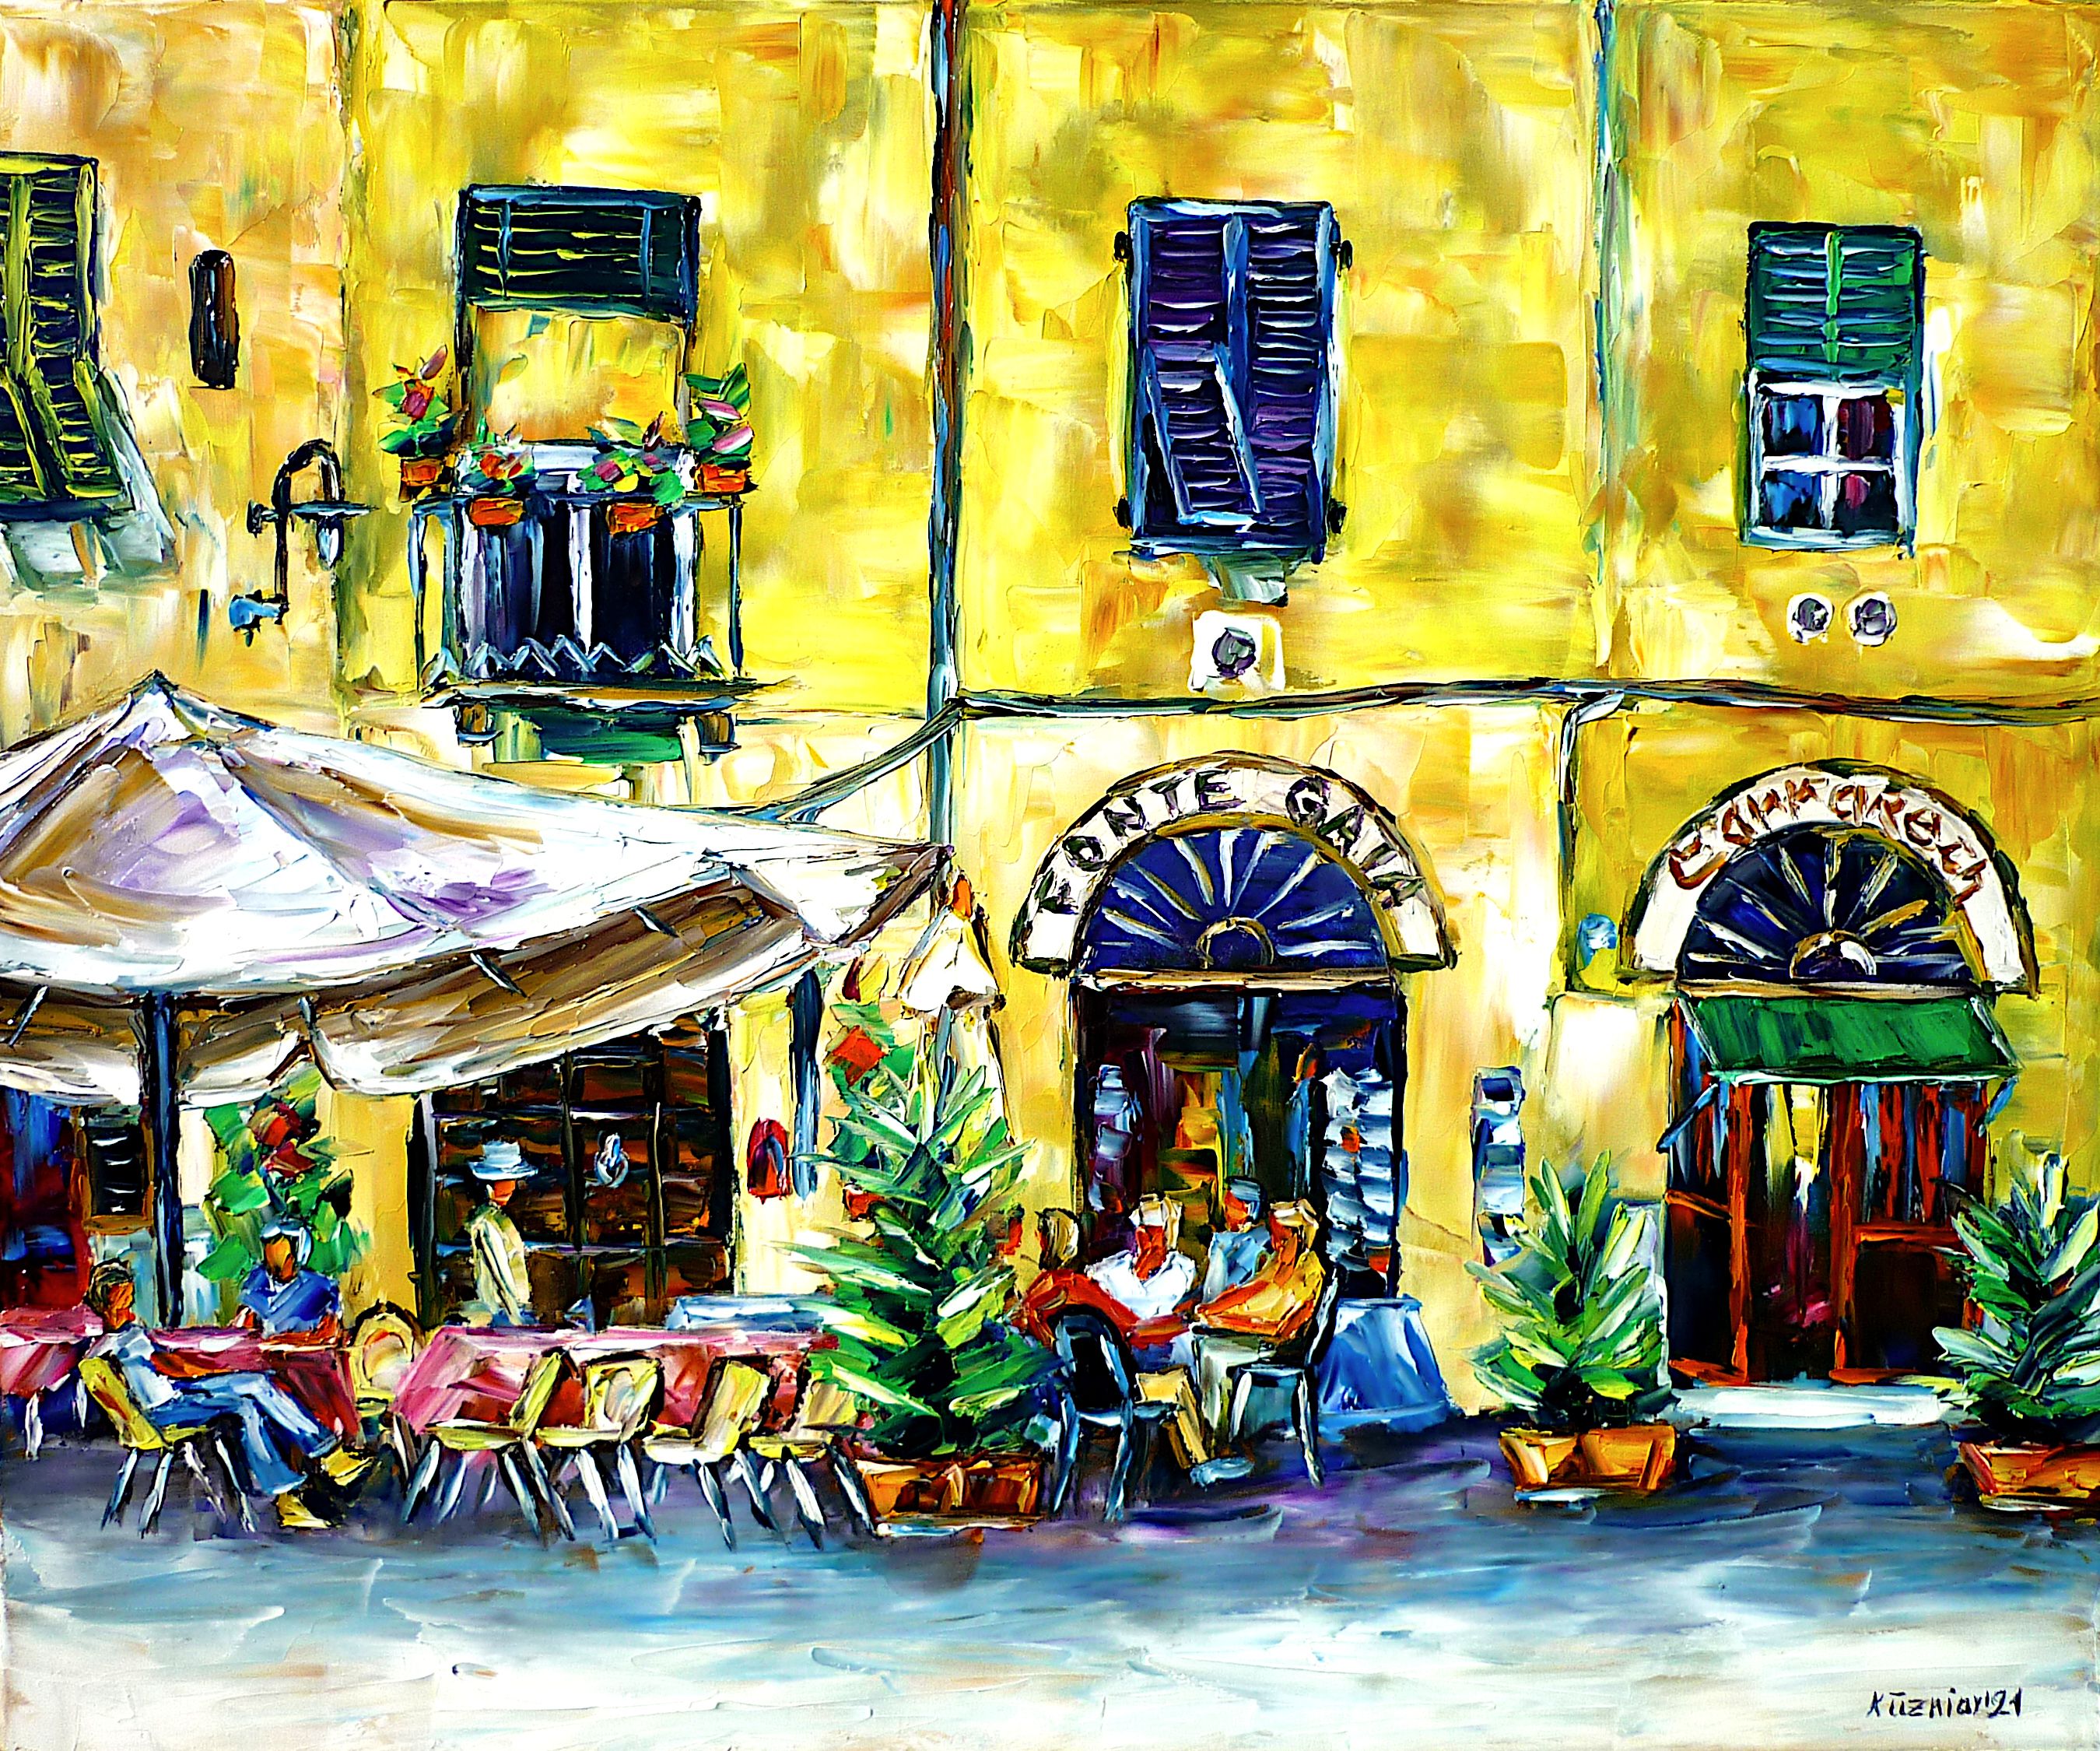 people in the cafe,lucca in summer,sitting in the cafe,sitting outside,people in summer,enjoying summer,cafe in lucca,lucca caffe,lucca gelateria,lucca bar,lucca cityscape,lucca city scenery,beautiful tuscany,tuscany romance,tuscany picture,lucca painting,tuscany love,summer painting,italy lovers,summer feelings,summer colors,tuscany sun,sunlight,summer in italy,summer in tuscany,joy,friendly picture,friendly painting,peace,peaceful picture,peaceful painting,palette knife oil painting,modernart,impressionism,expressionism,figurative,abstract painting,lively colours,colorful painting,bright colors,light reflections,impasto painting,living room art,living room picture,living room painting